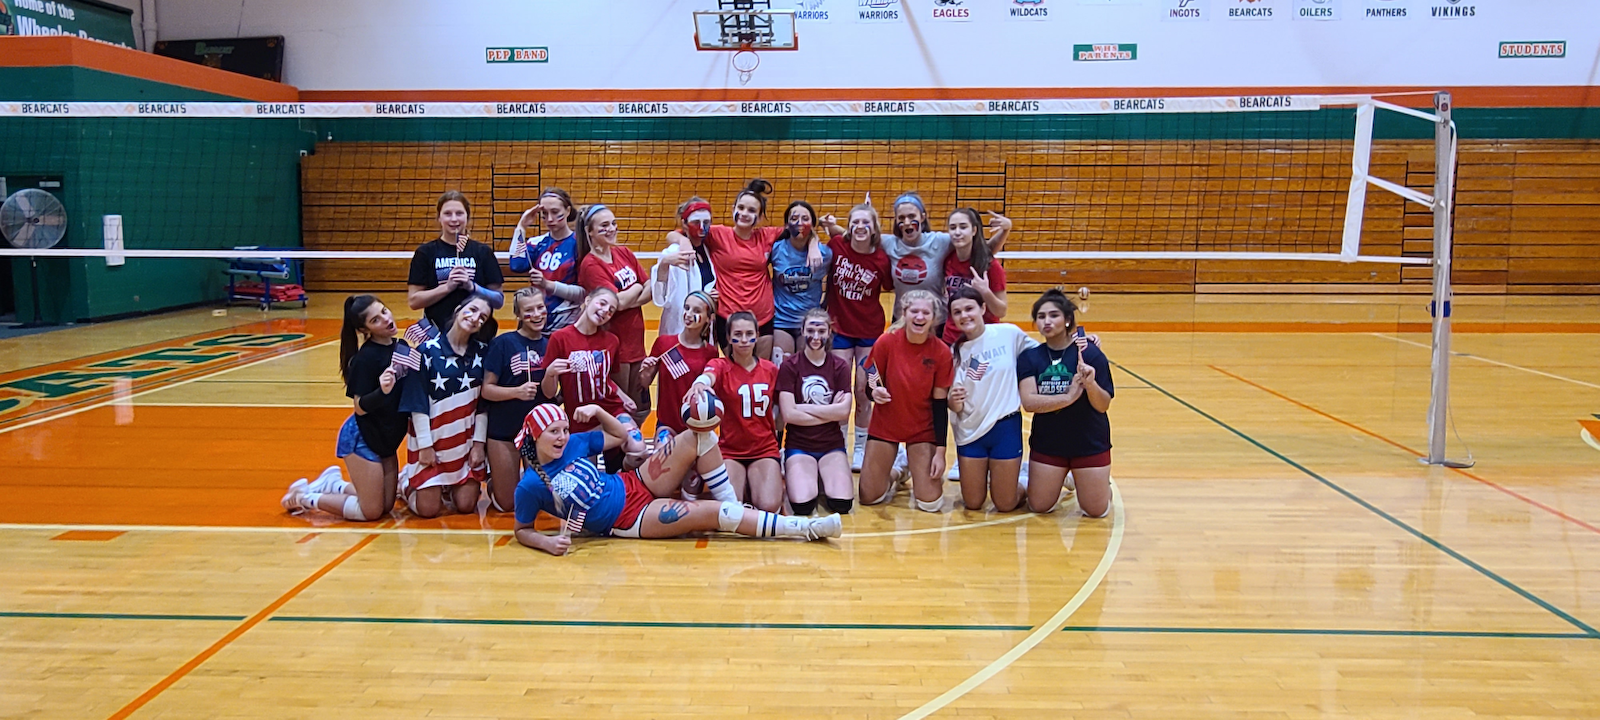 Volleyball shows patriotic side at practice after another long week cover photo